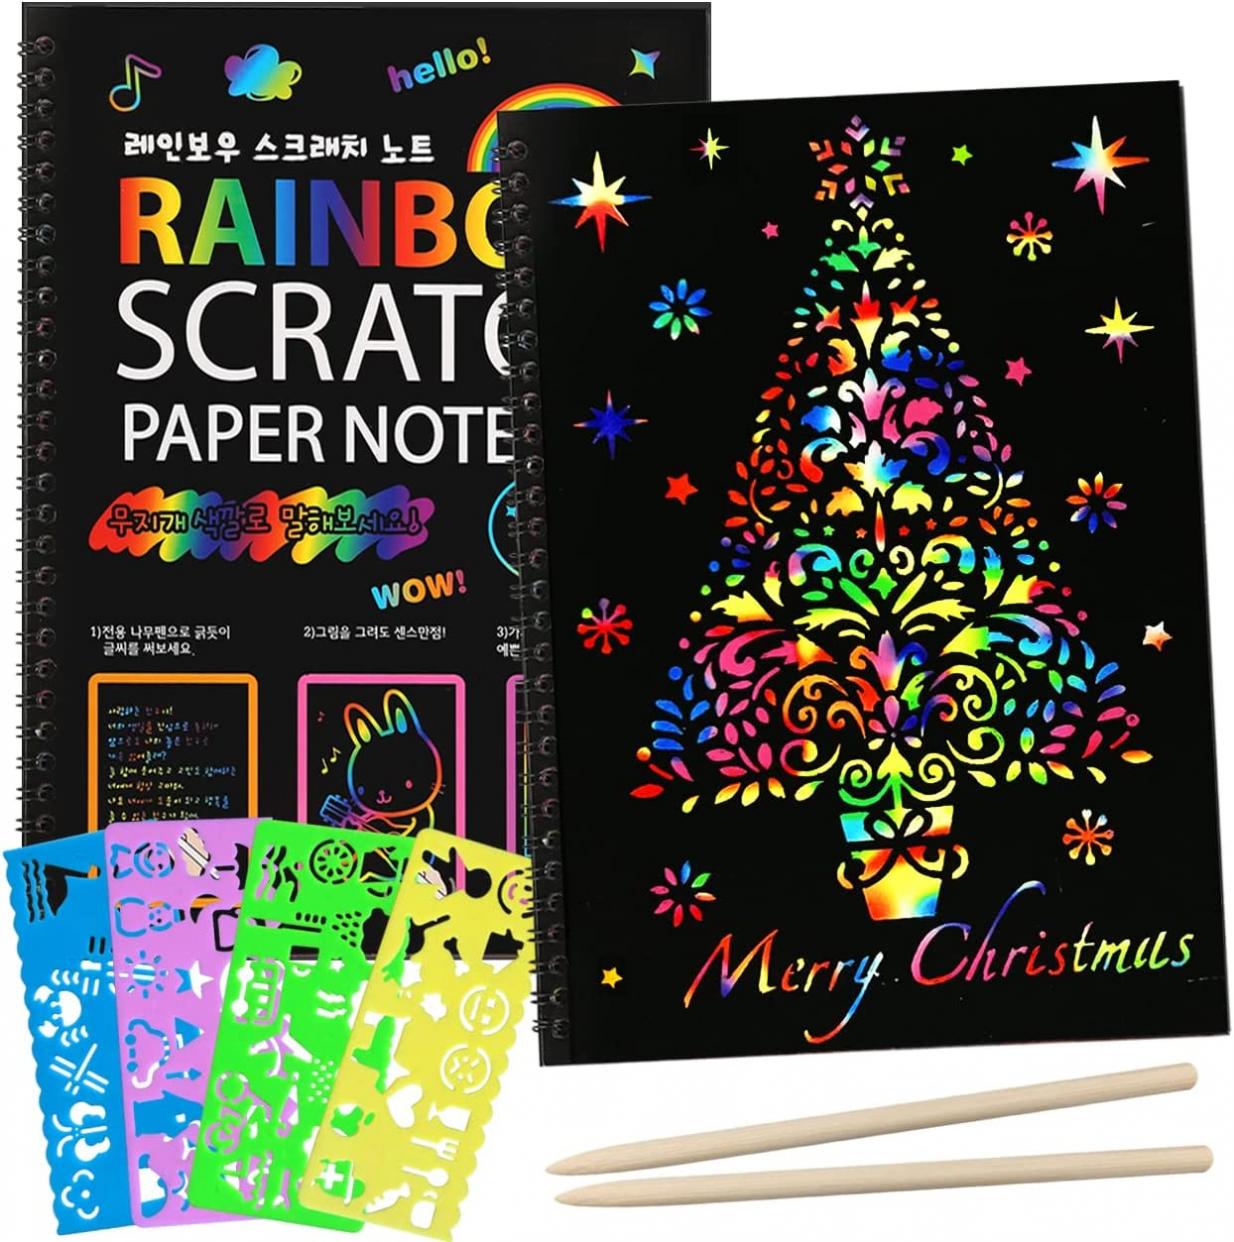 ZMLM Scratch Paper Art Set: 2 Pack Rainbow Scratch Off Crafts Supplies Kits for Age 3 4 5 6 7 8-12 Kids Gift Toy for Girls Boy Teen Birthday|DIY Party Favor|Christmas|Halloween|Coloring Fun Activity